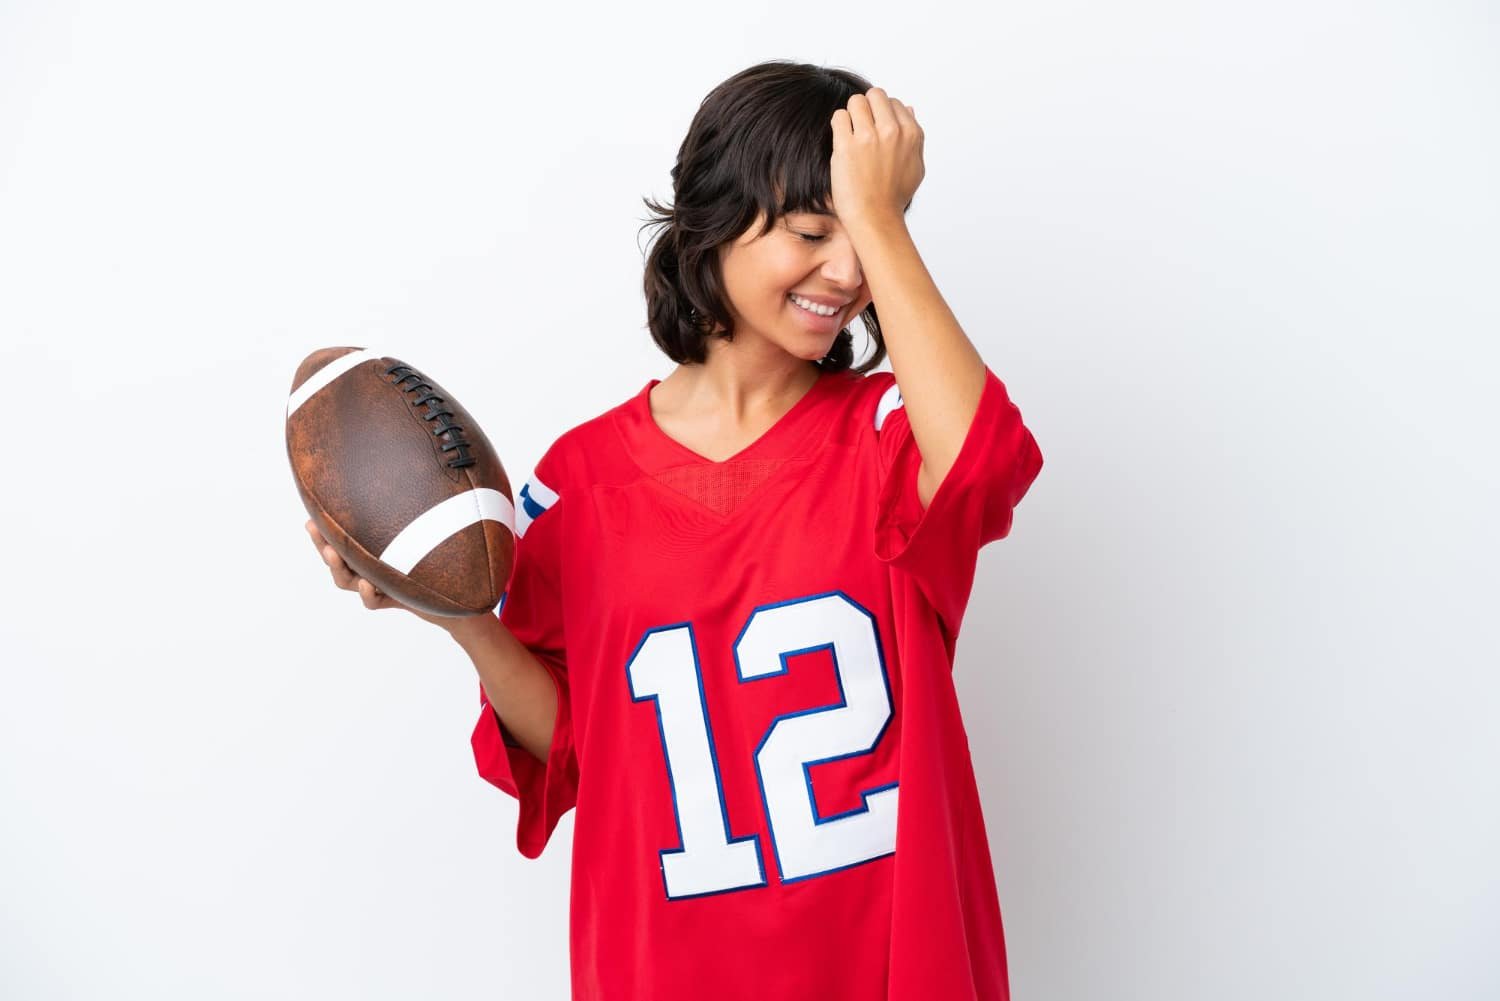 You are currently viewing Support Your Favorite NFL Team With San Francisco 49ers Fan Shop’s Official Merchandise